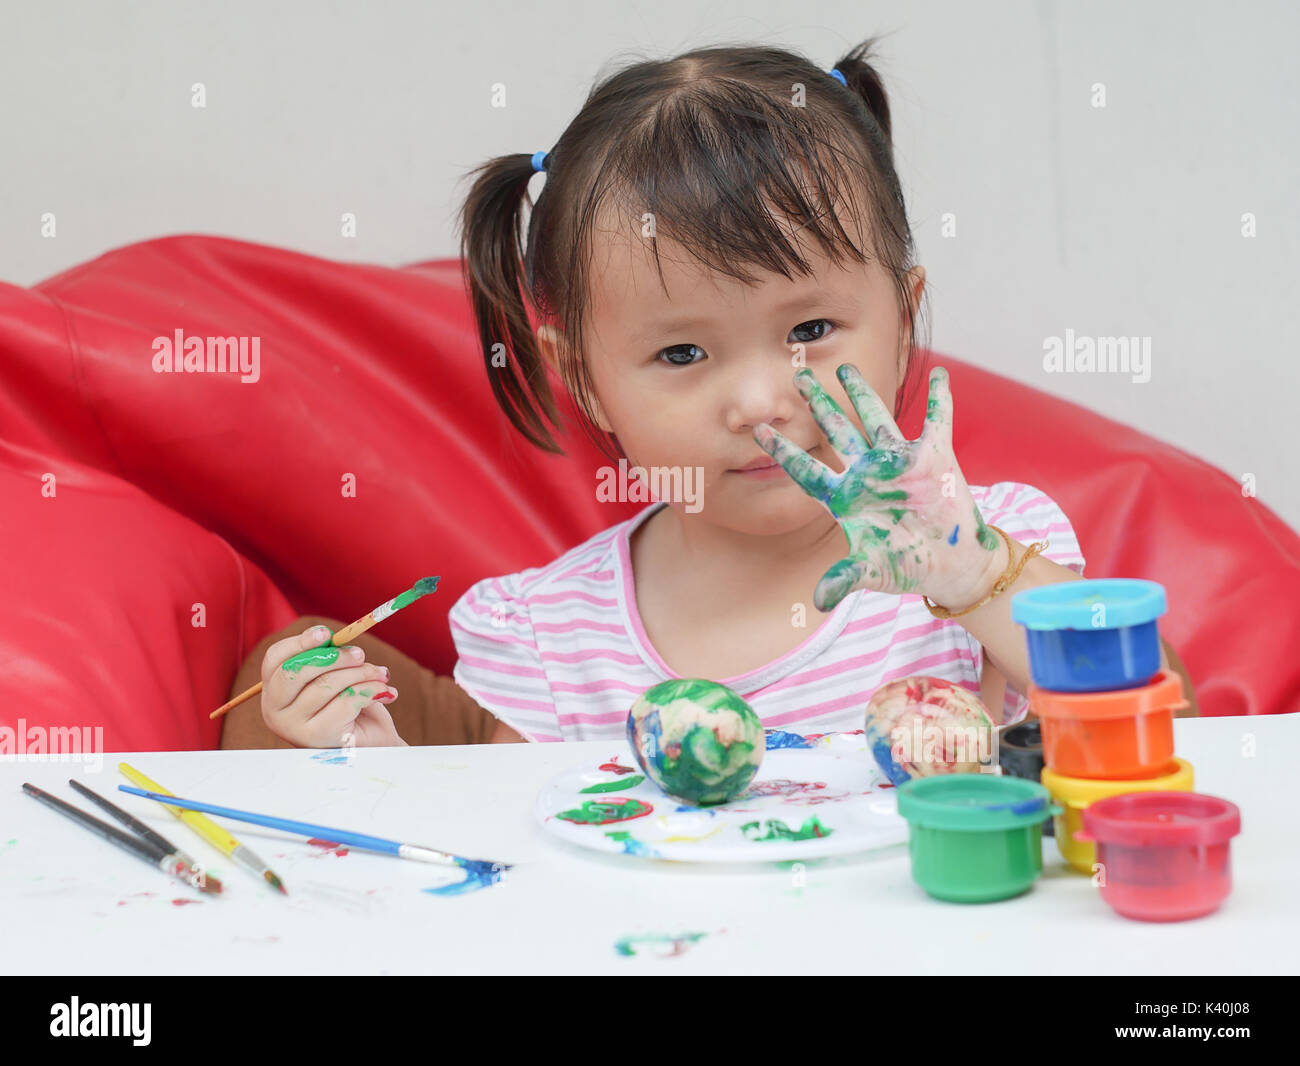 Little Girl Painting with paintbrush and colorful paints children development concept Stock Photo